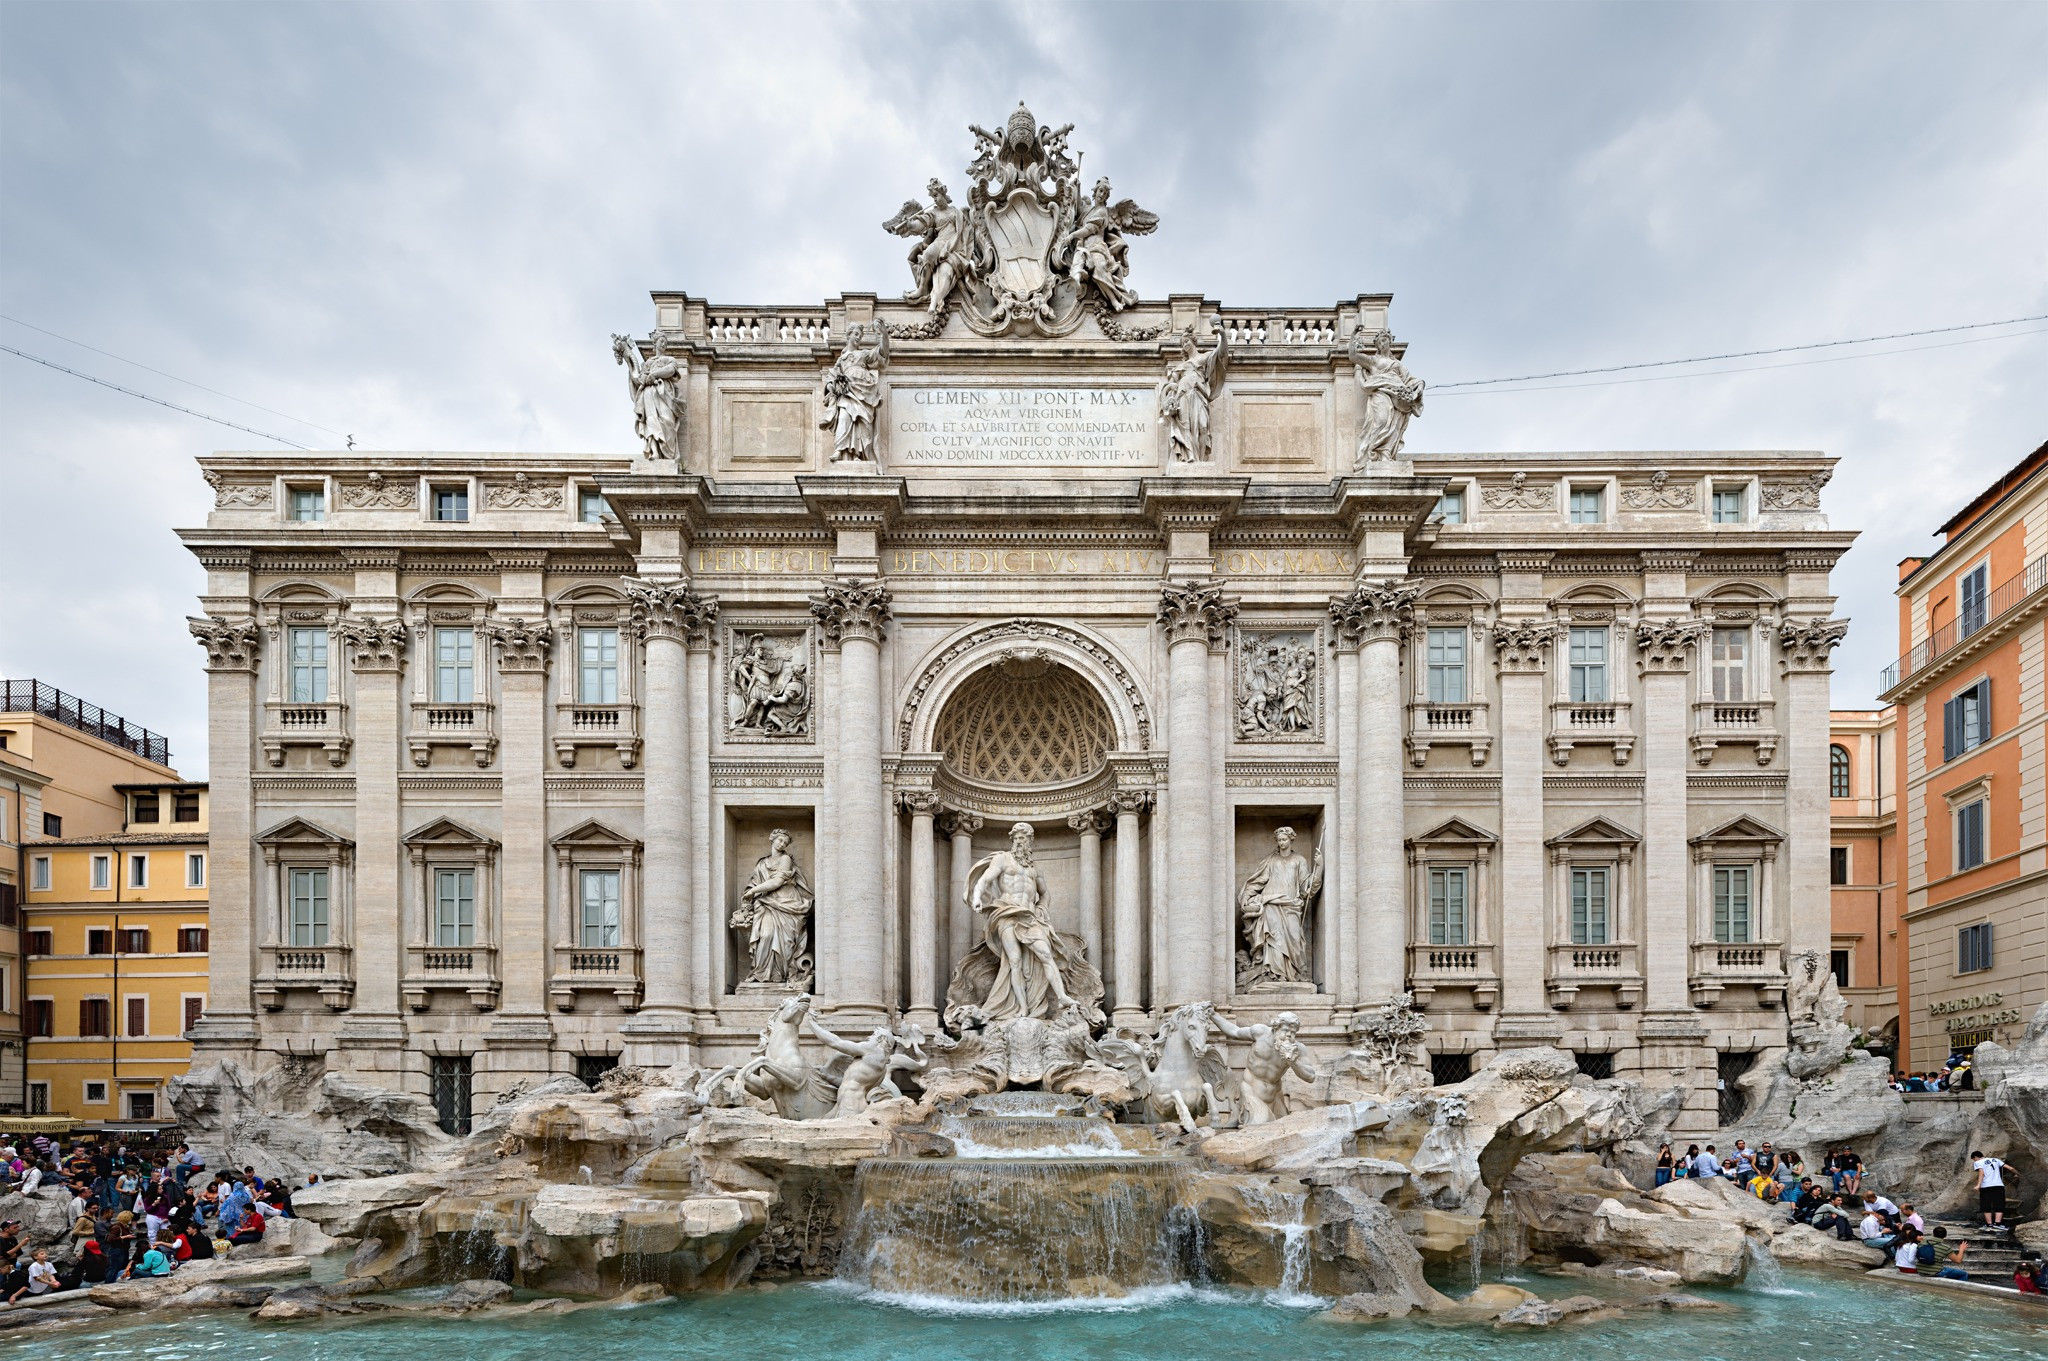 The baroque style 'Trevi fountain' was designed by Nicola Salvi and completed by Giuseppe Pannini in 1762